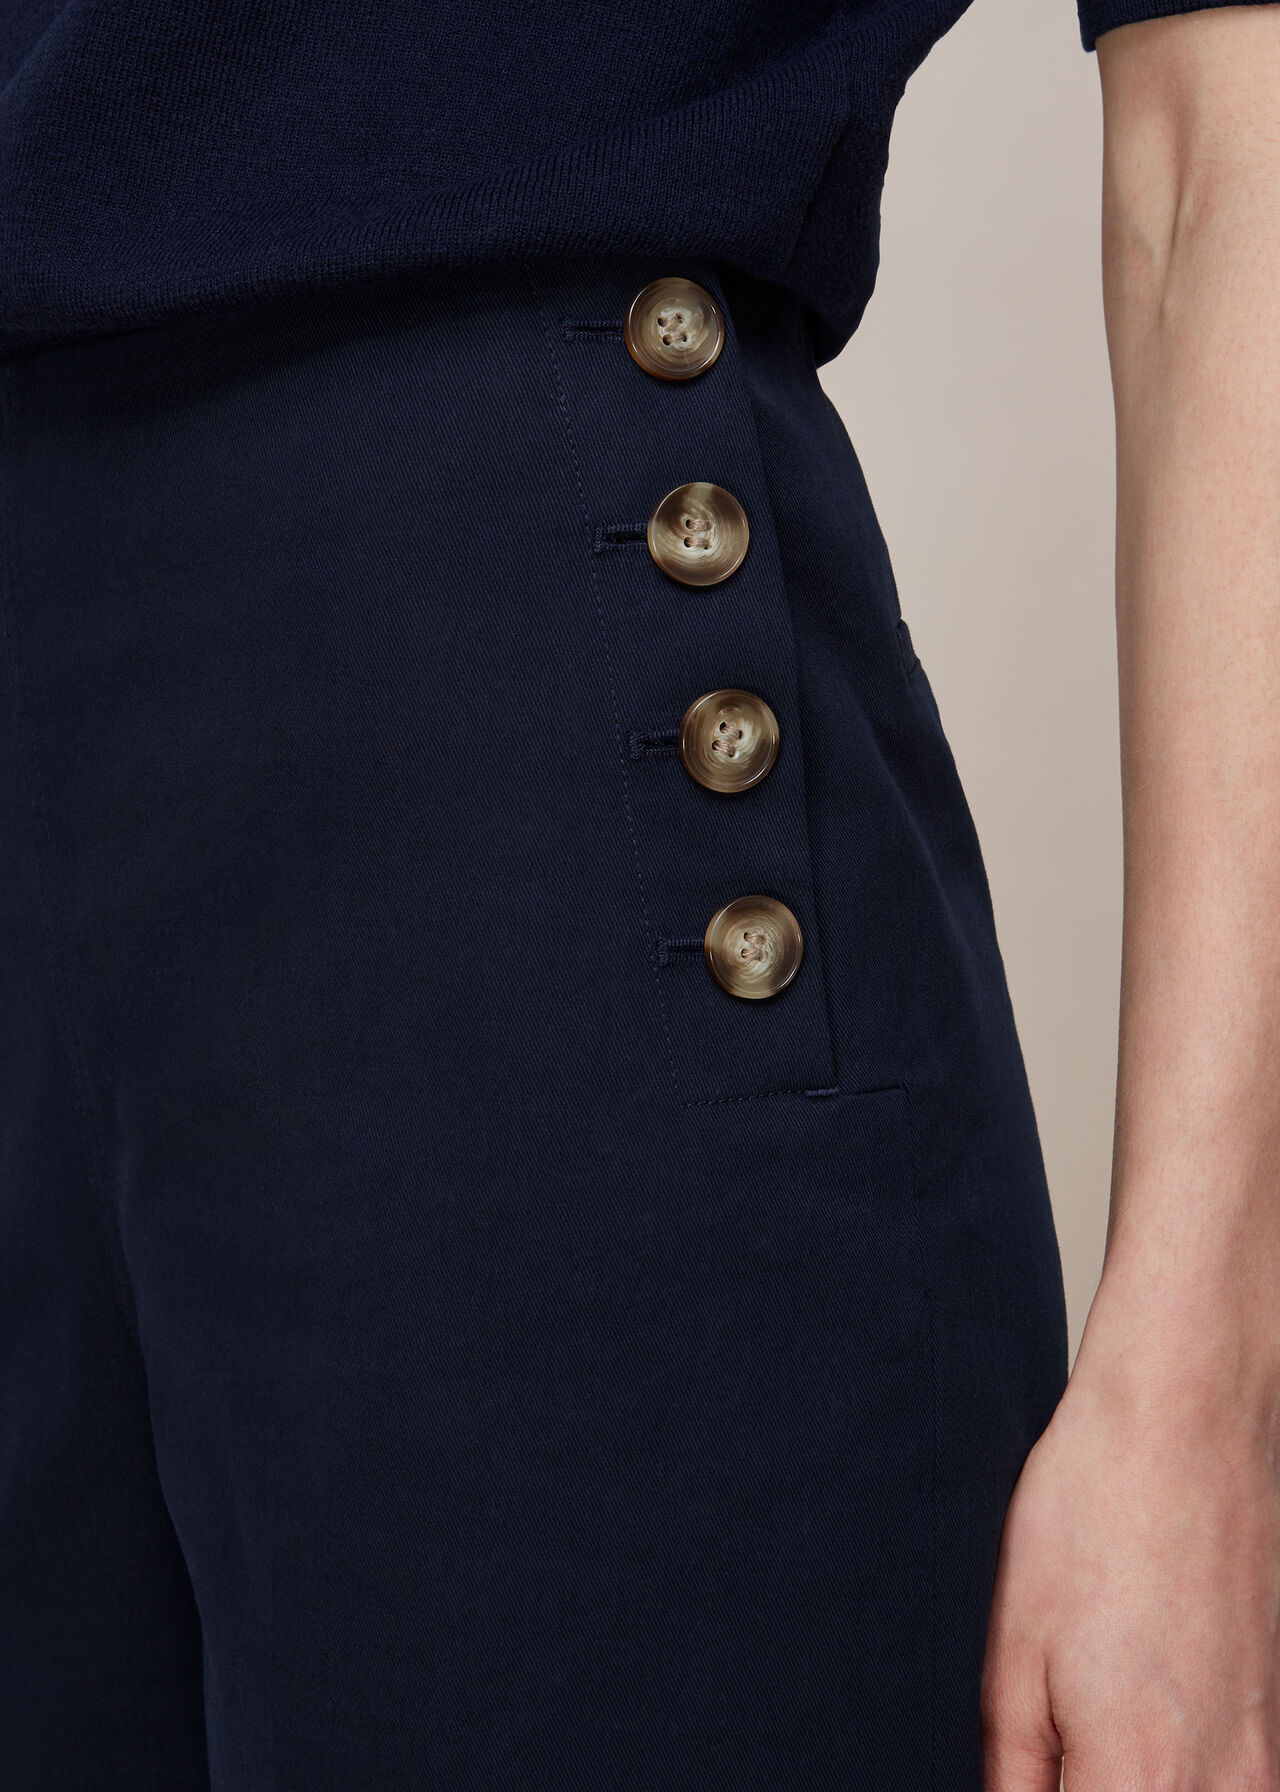 Cadie Side Button Trouser Navy